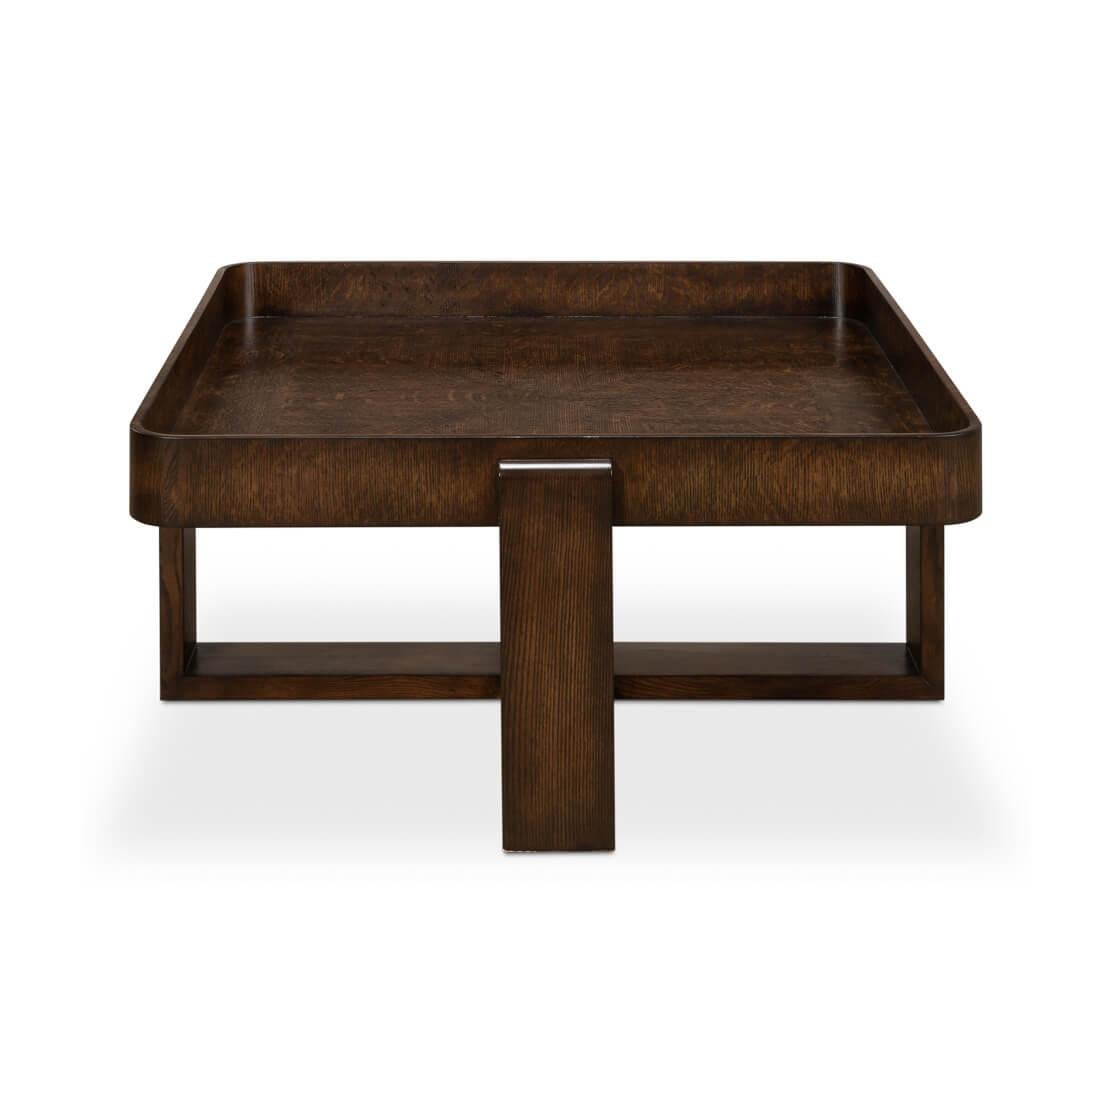 This table is a substantial centerpiece, crafted from oak, its generous tray top features raised edges, perfect for holding drinks and decorative items securely.

Below, the substantial X-shaped base anchors the table, with legs that extend outward,